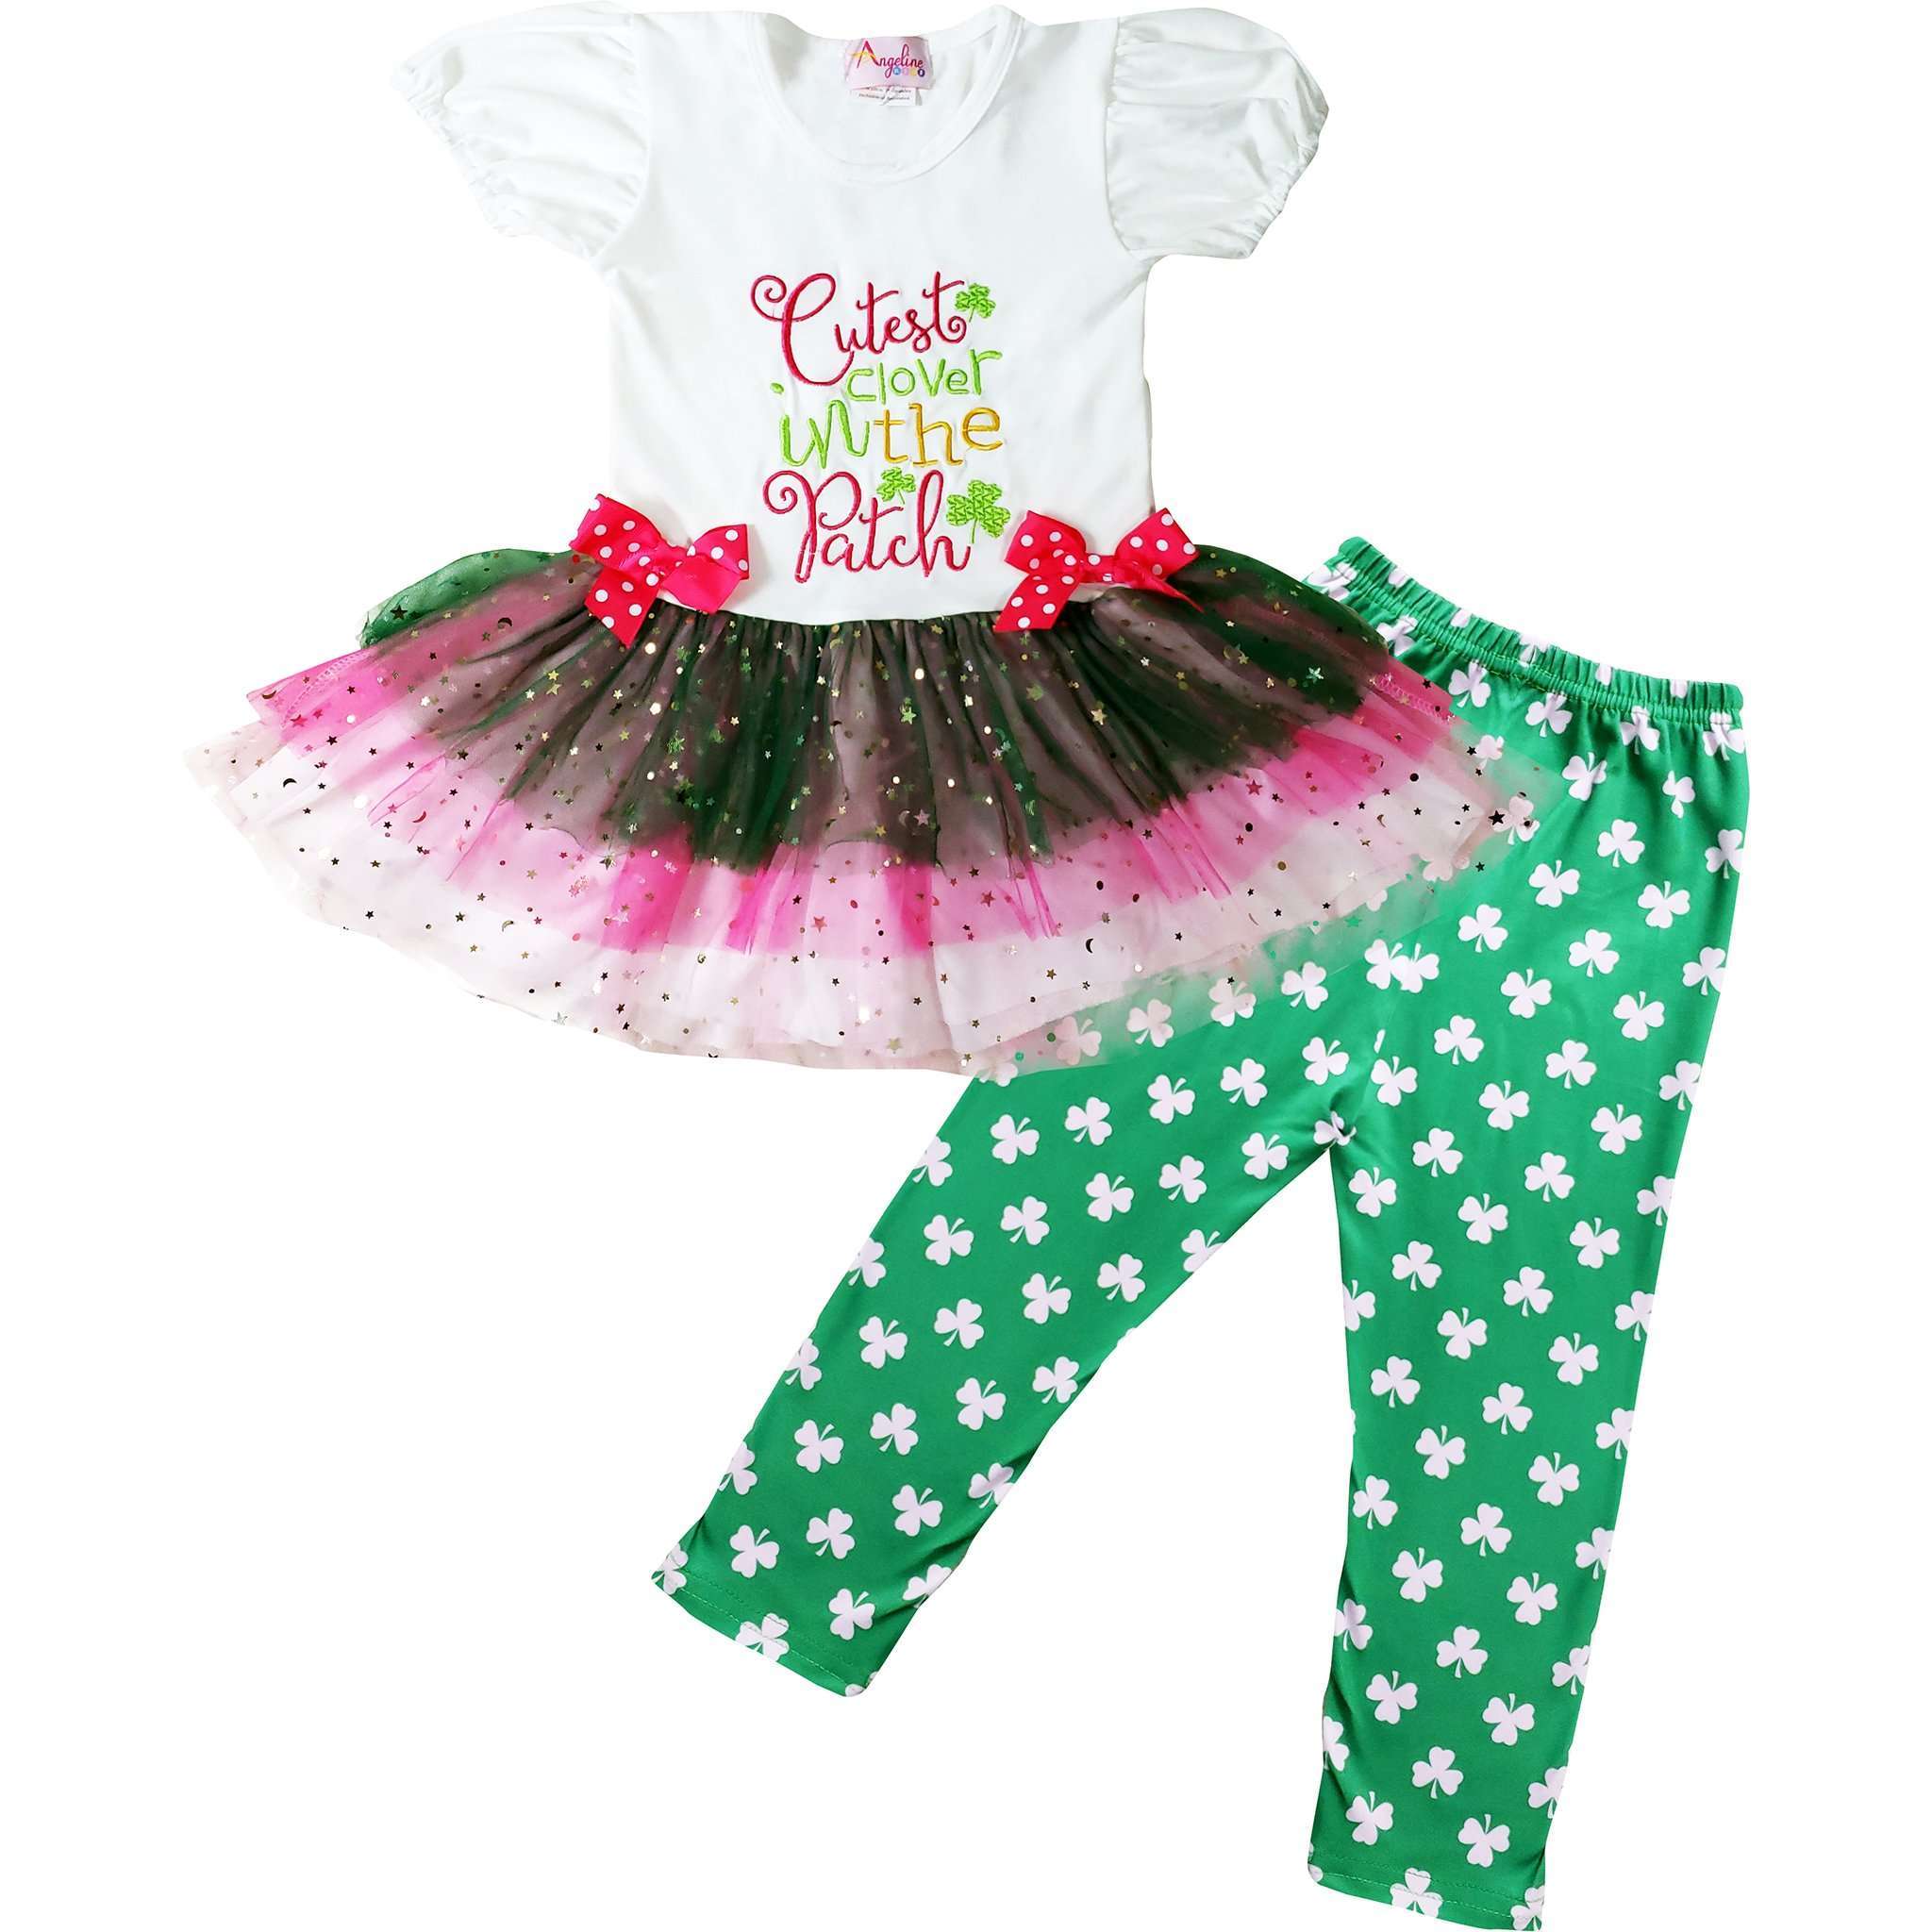 Angeline Kids:Baby Toddler Little Girls St. Patrick's Day Cutest Clover In The Patch Tutu Skirt Set